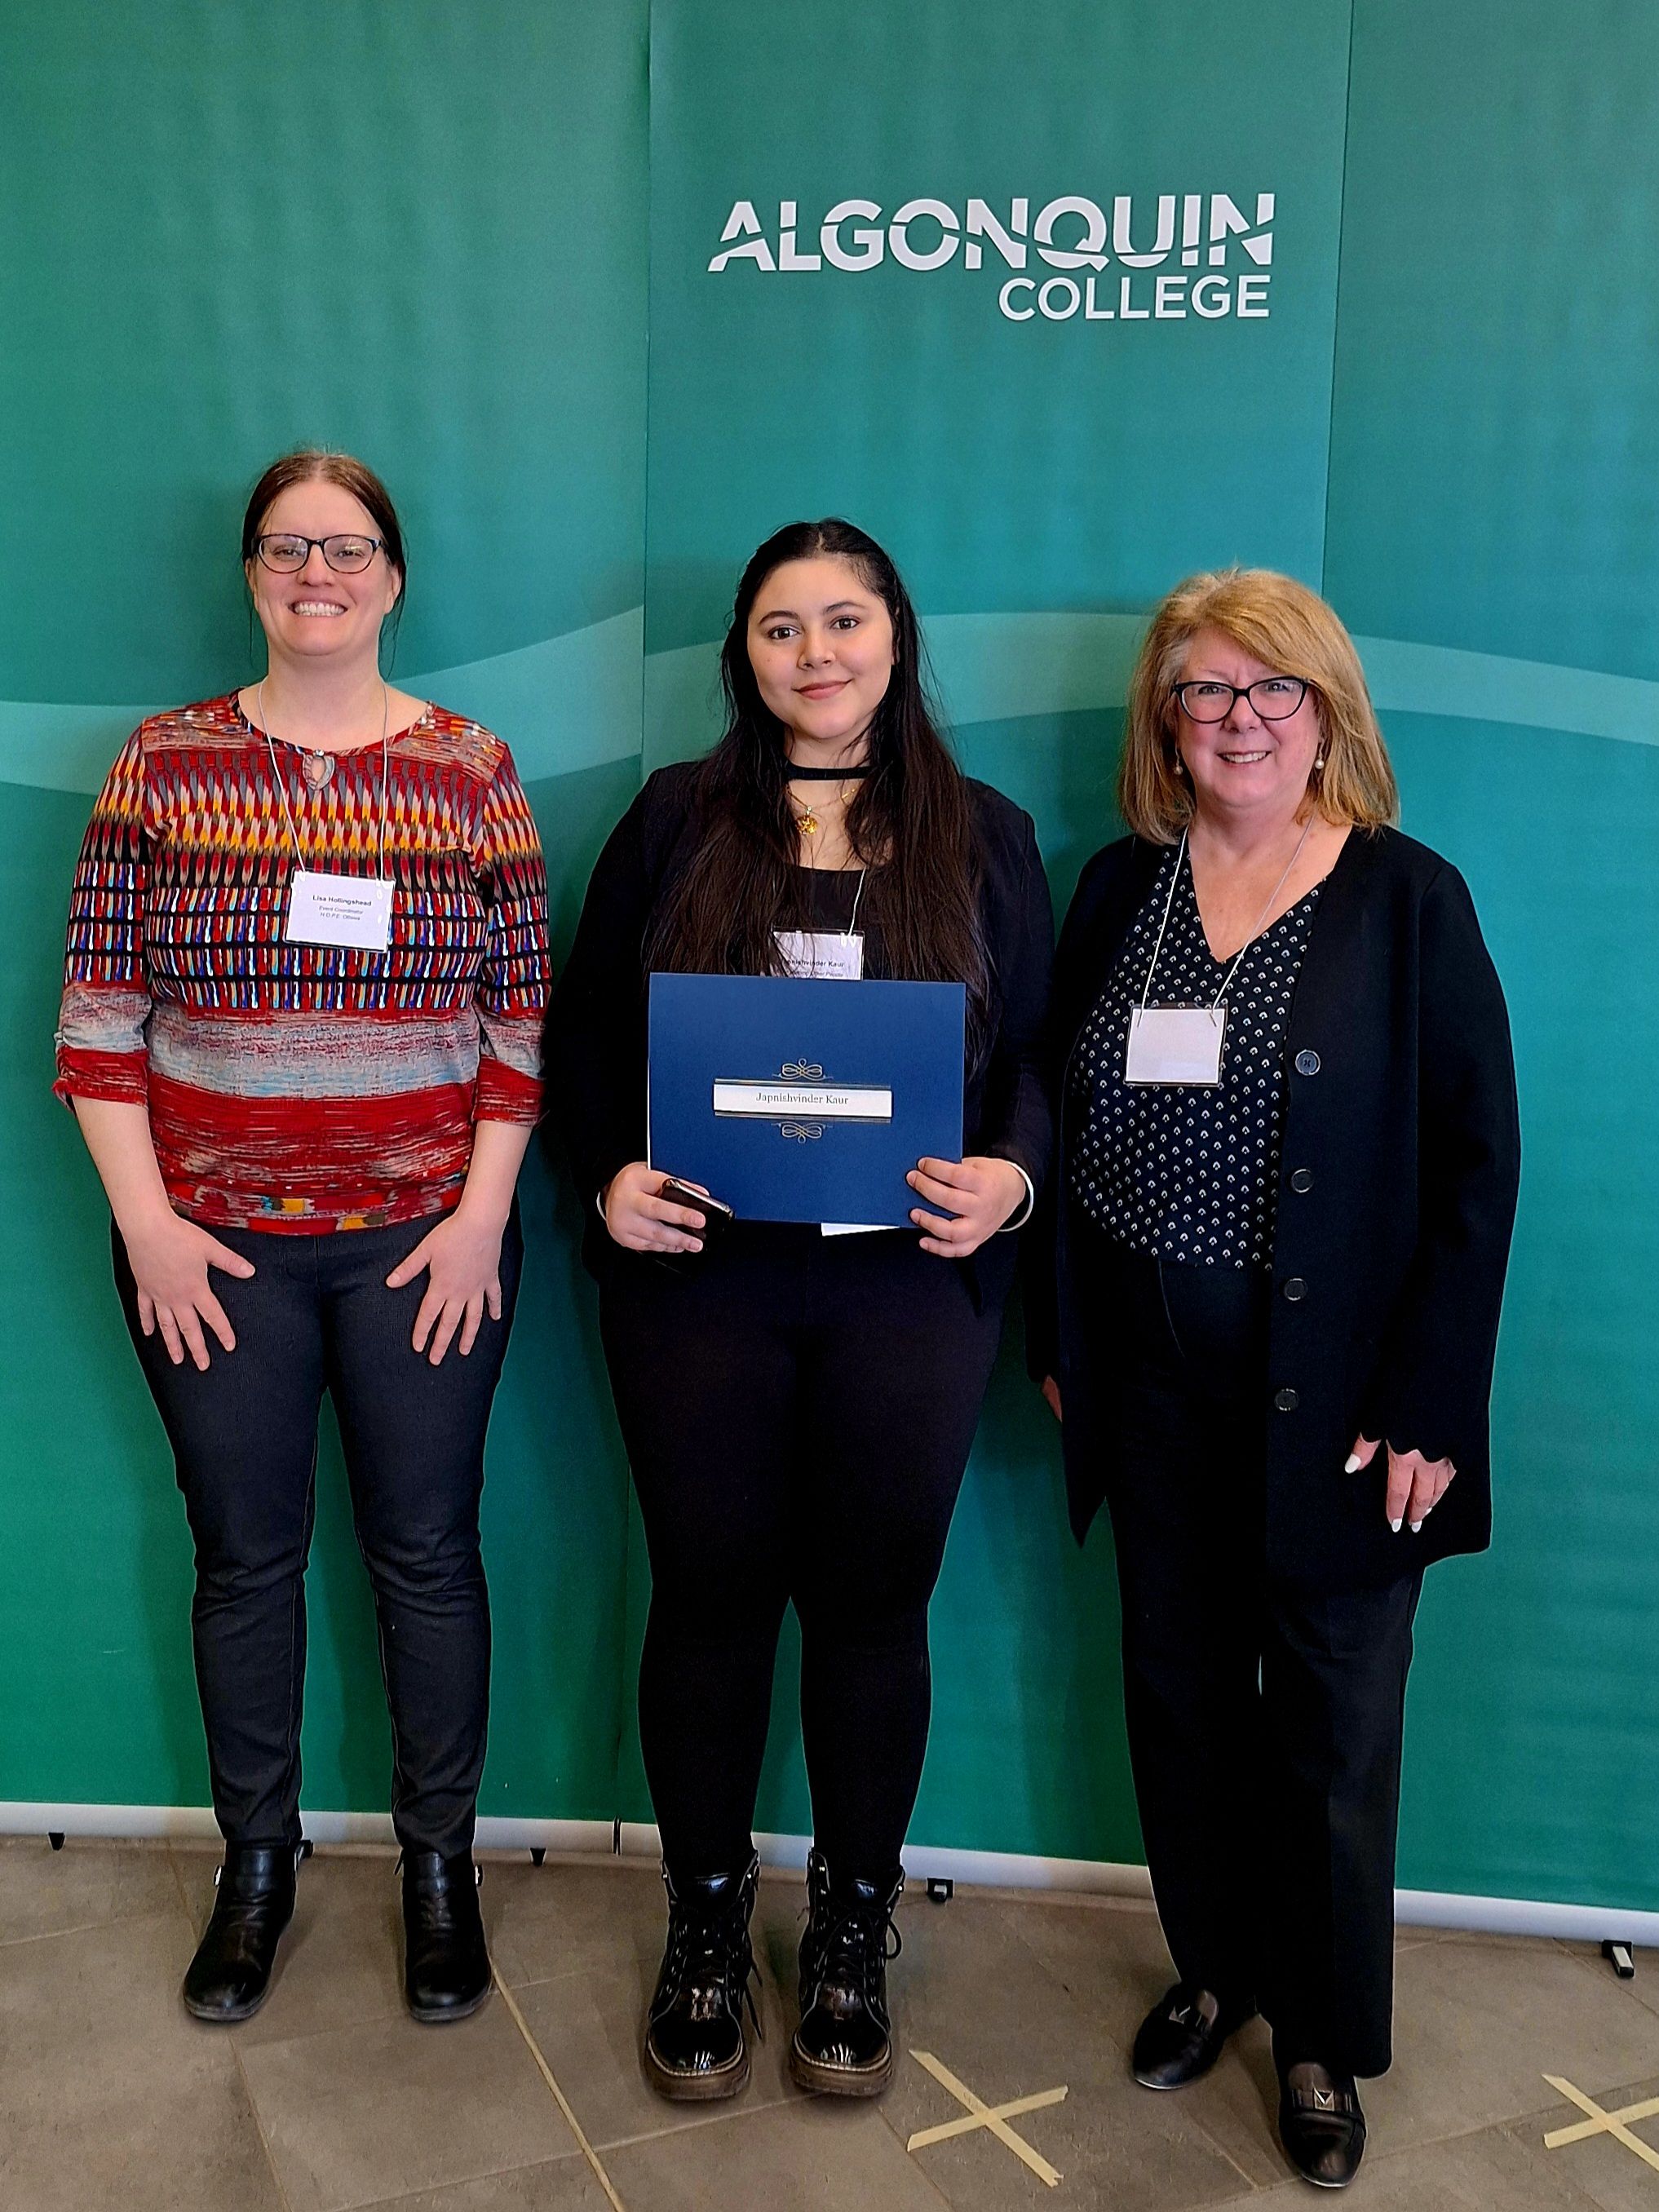 HOPE Scholarship in Memory of Sarah McKinnon Awards $1,000 to Promising Student at Algonquin College